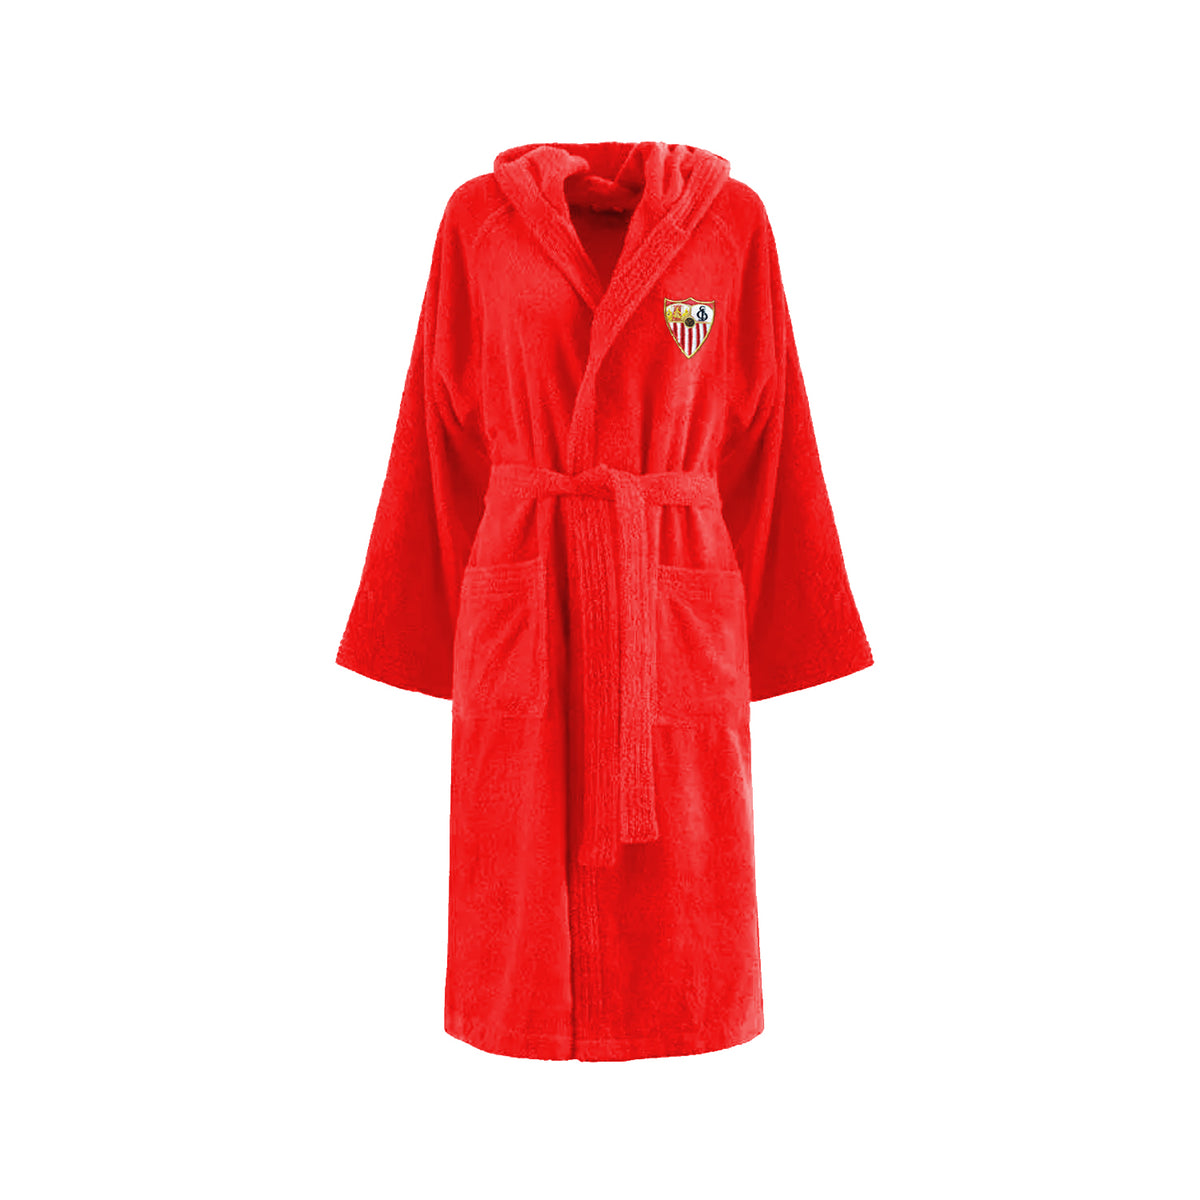 Adult red robe